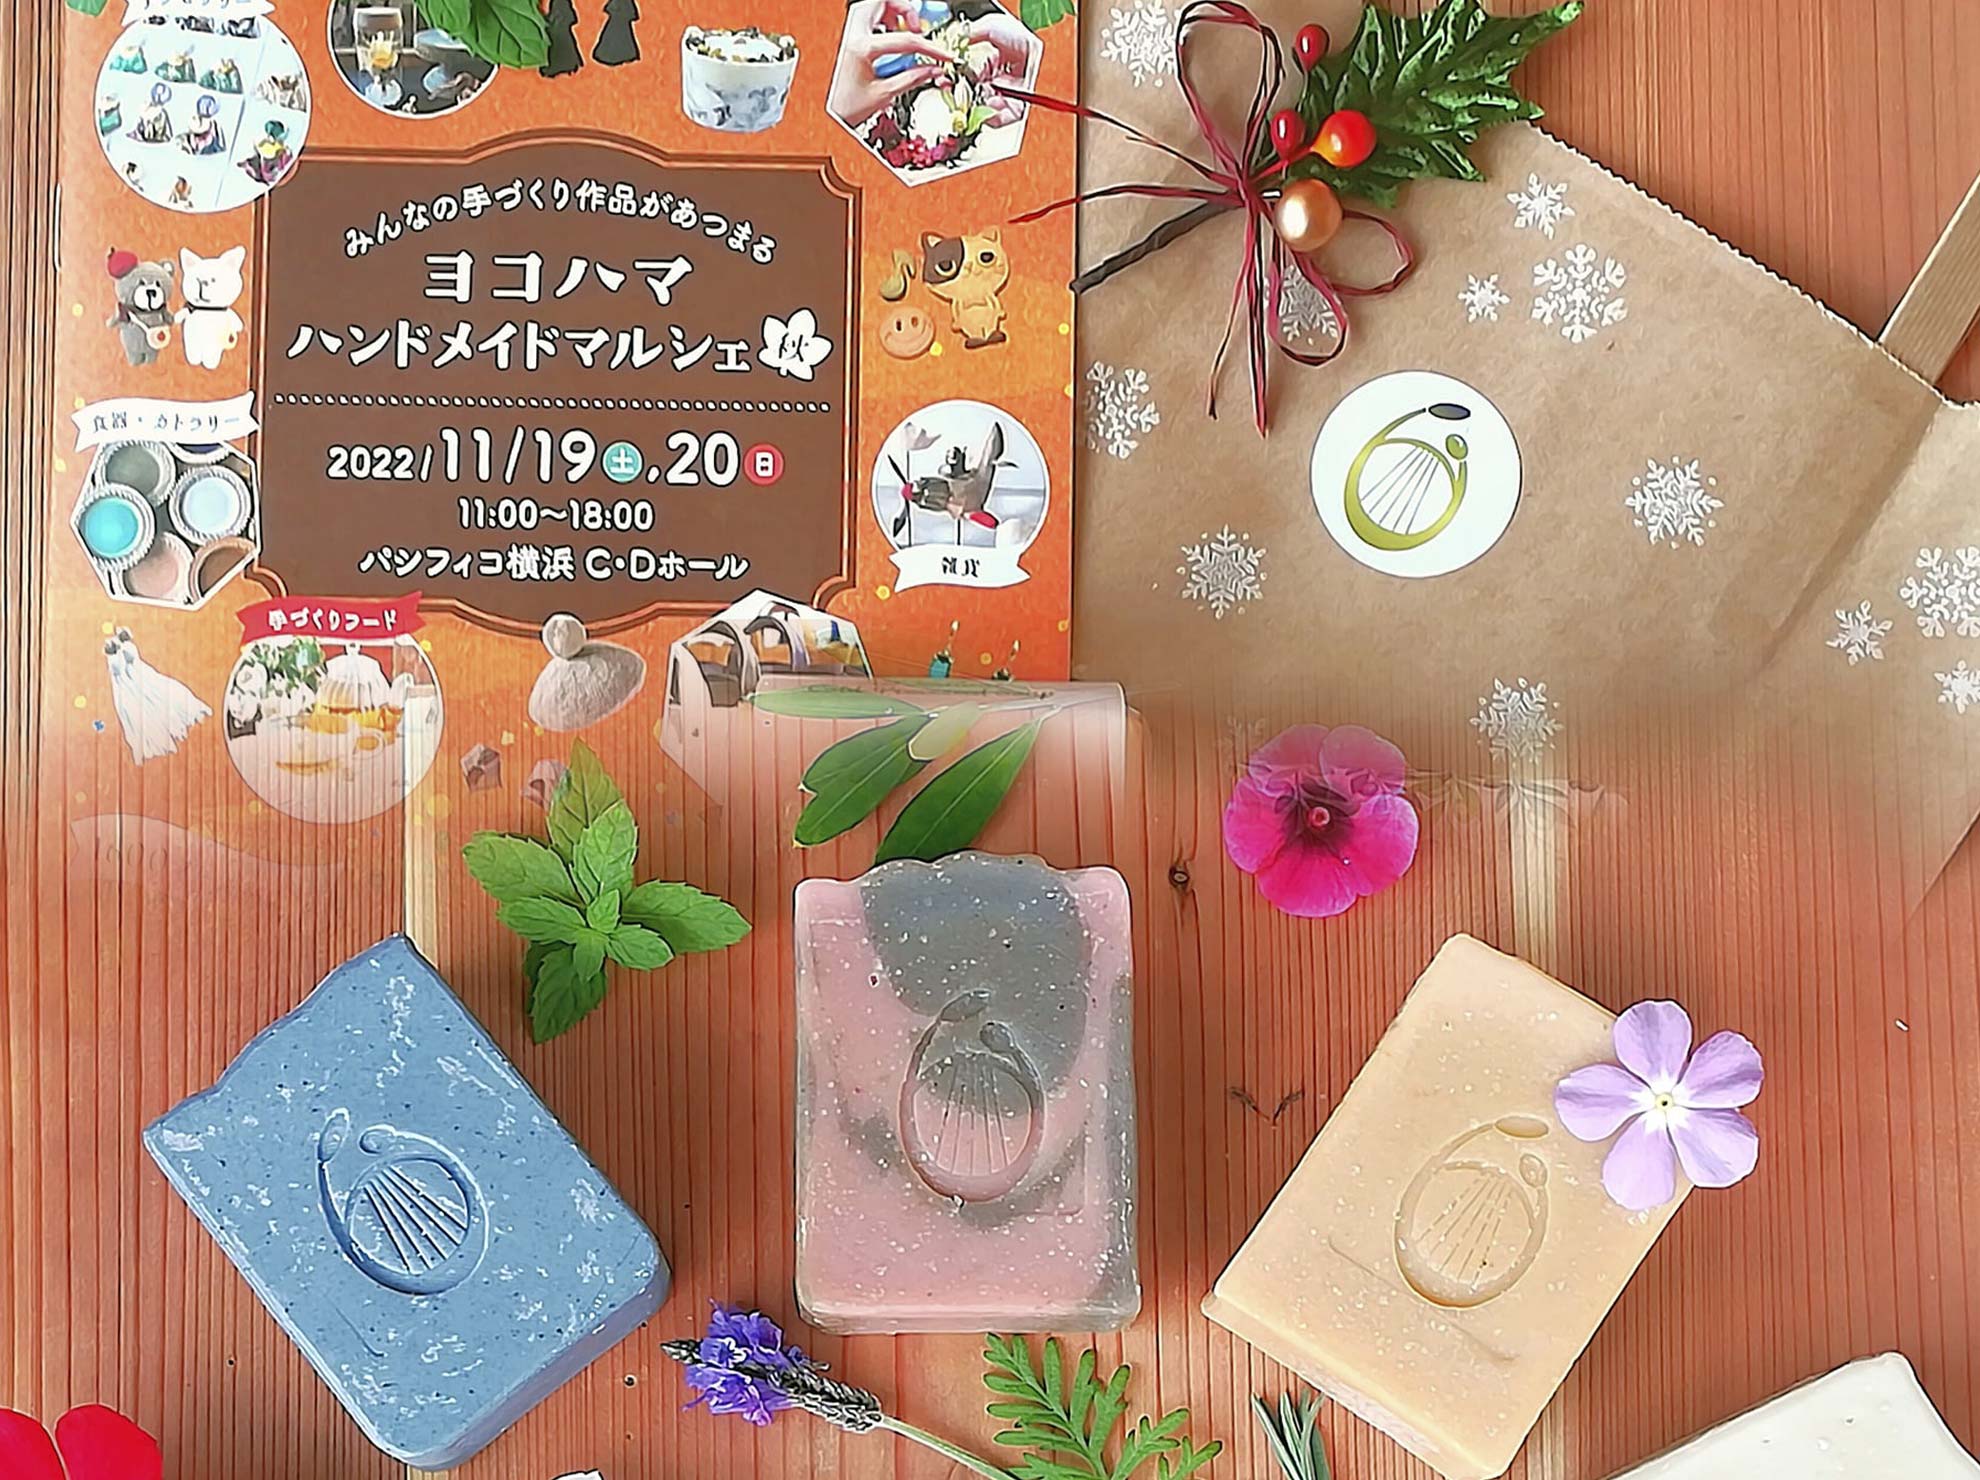 Orfey Gardens Event with handmade olive oil soaps 開催イベントで手作りソープを販売